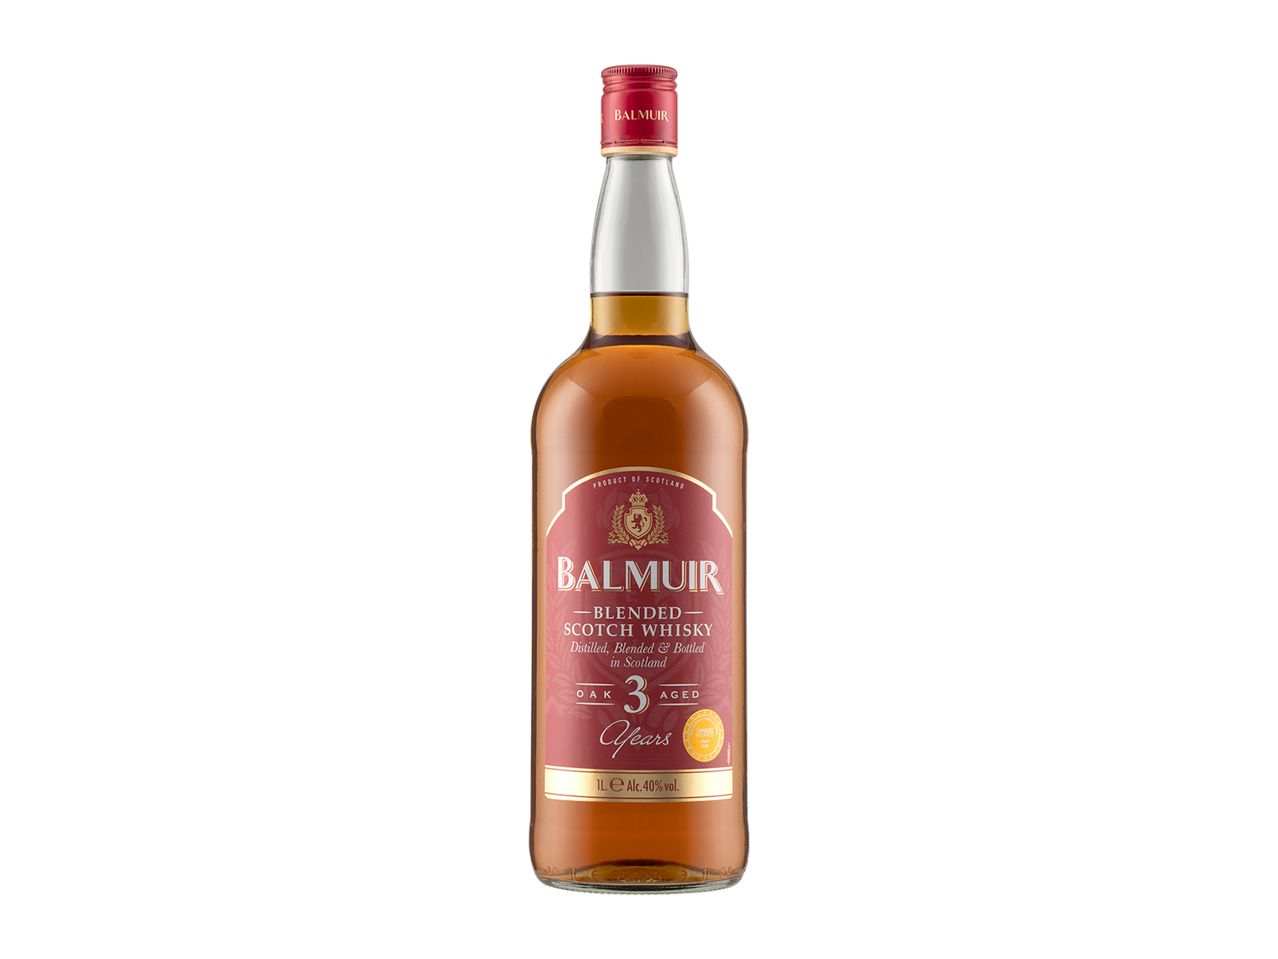 Go to full screen view: Balmuir Blended Scotch Whisky 1L - Image 1